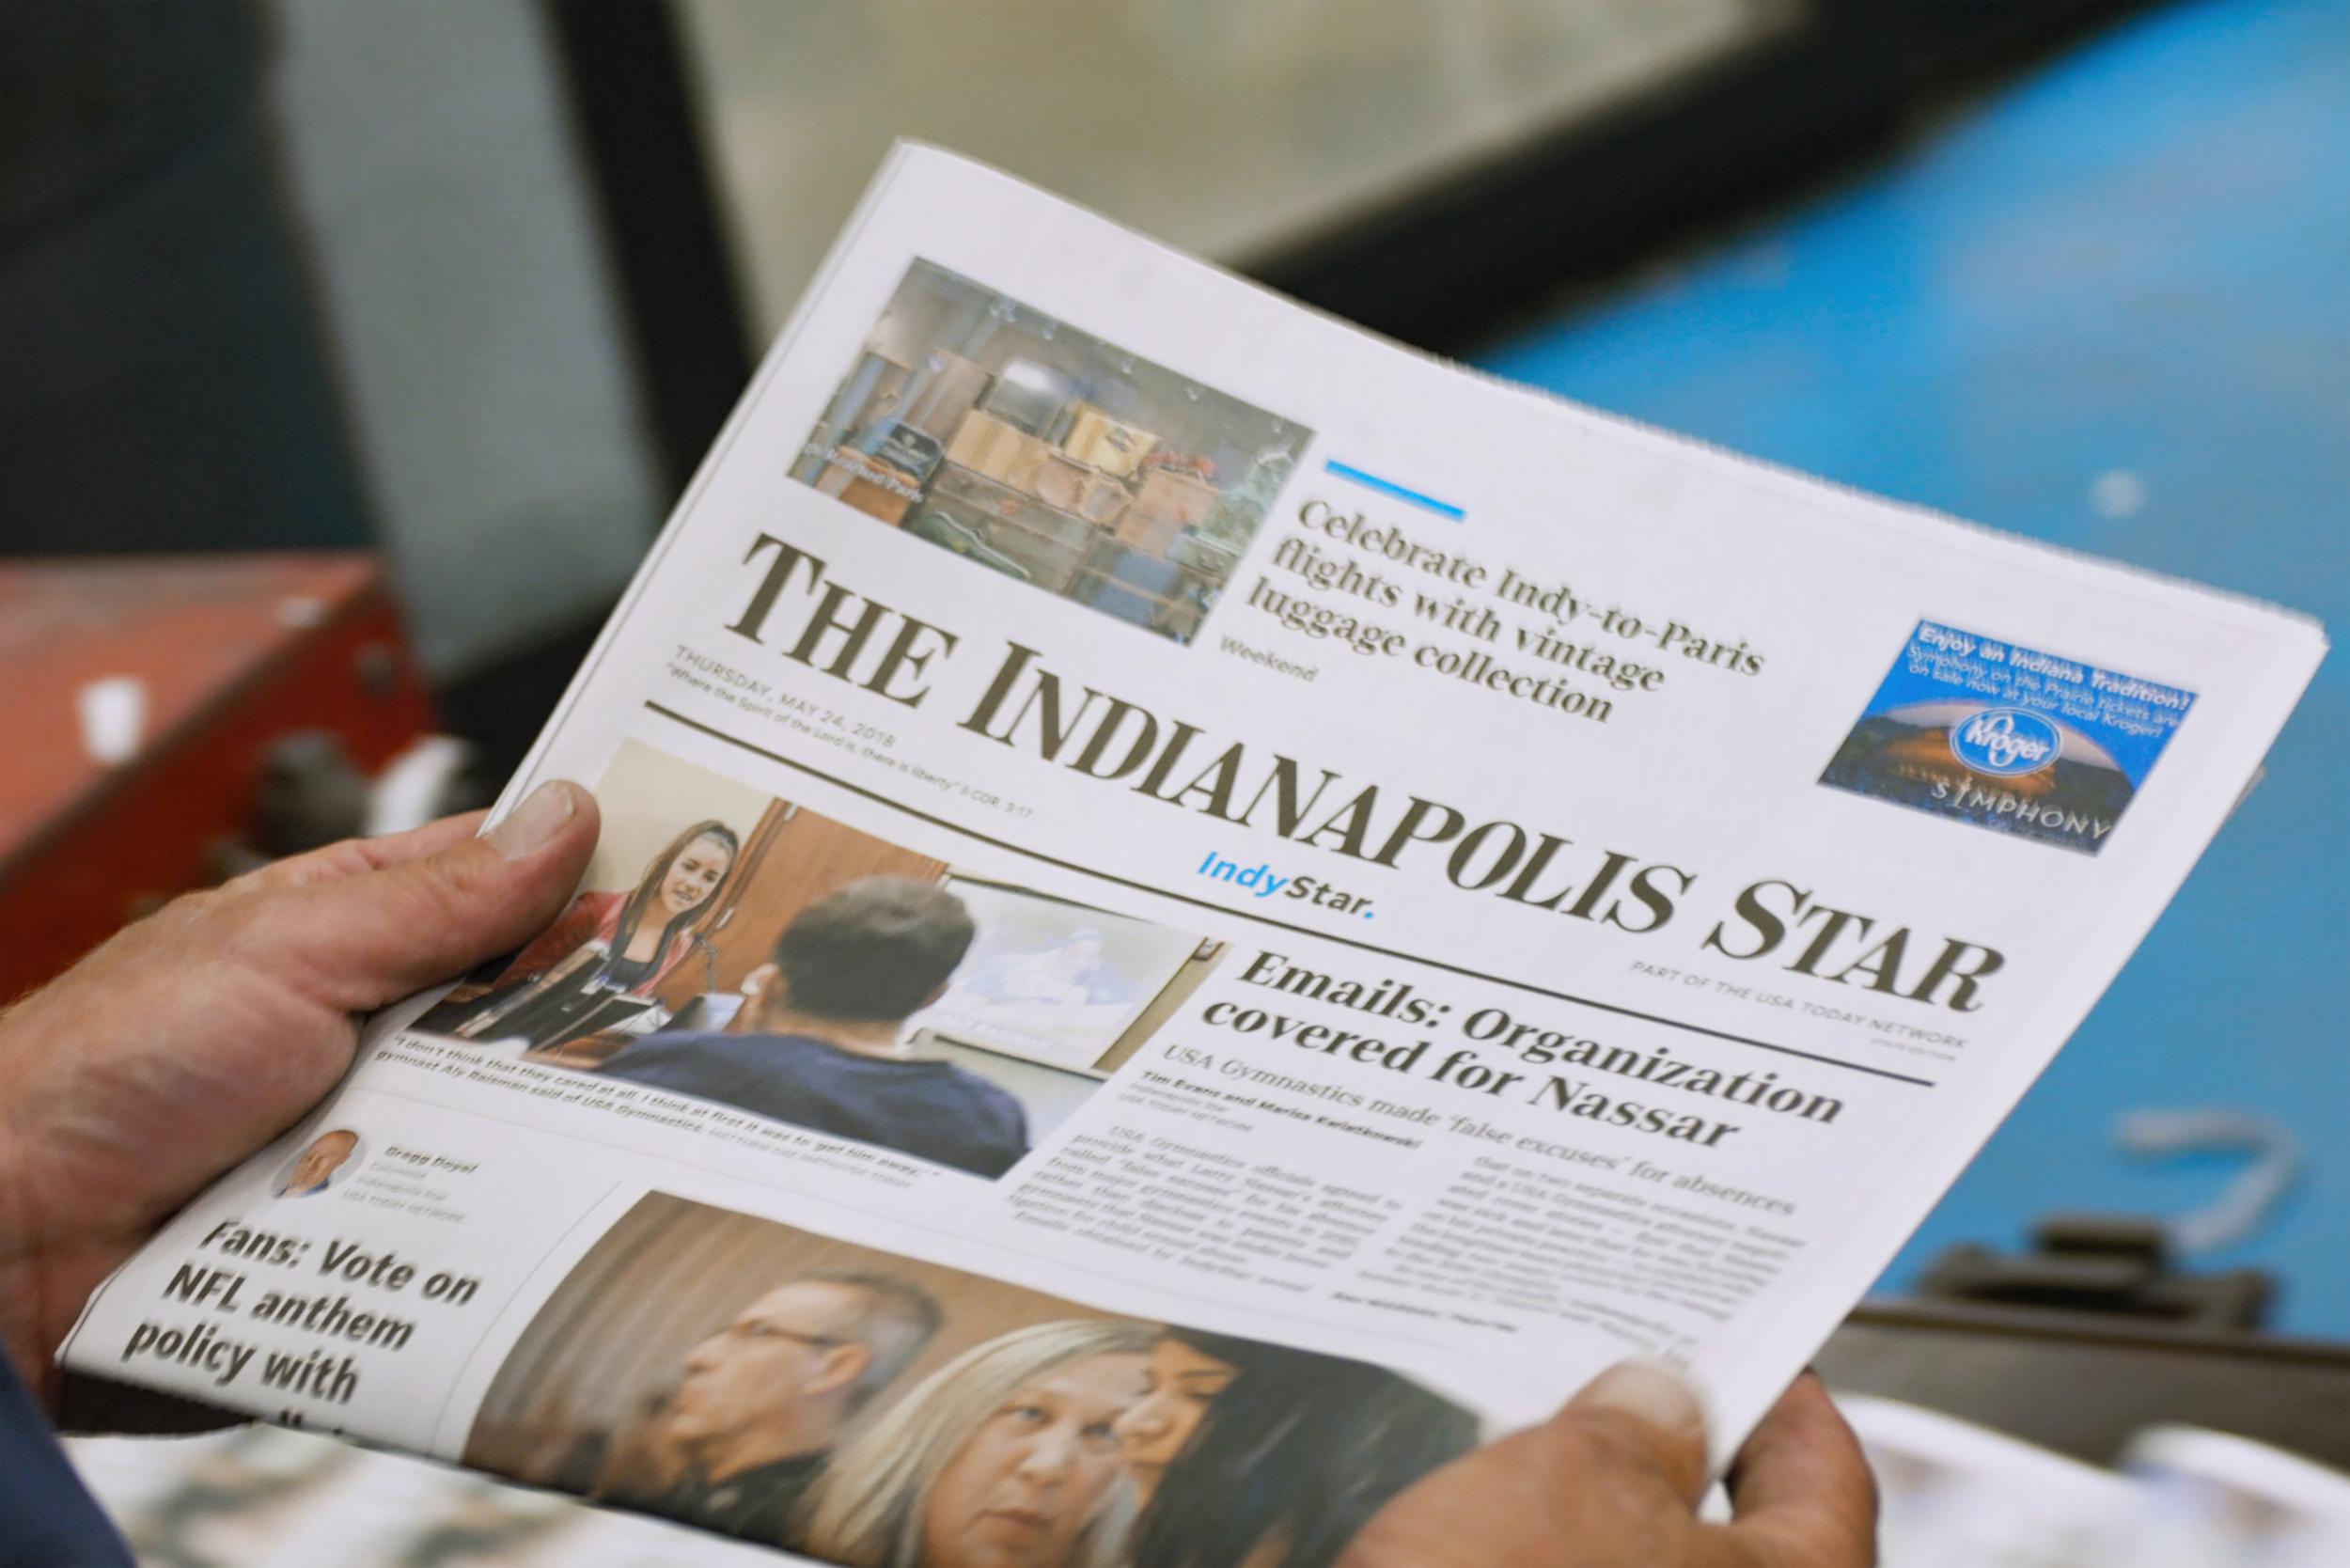 The Indianapolis Star newspaper